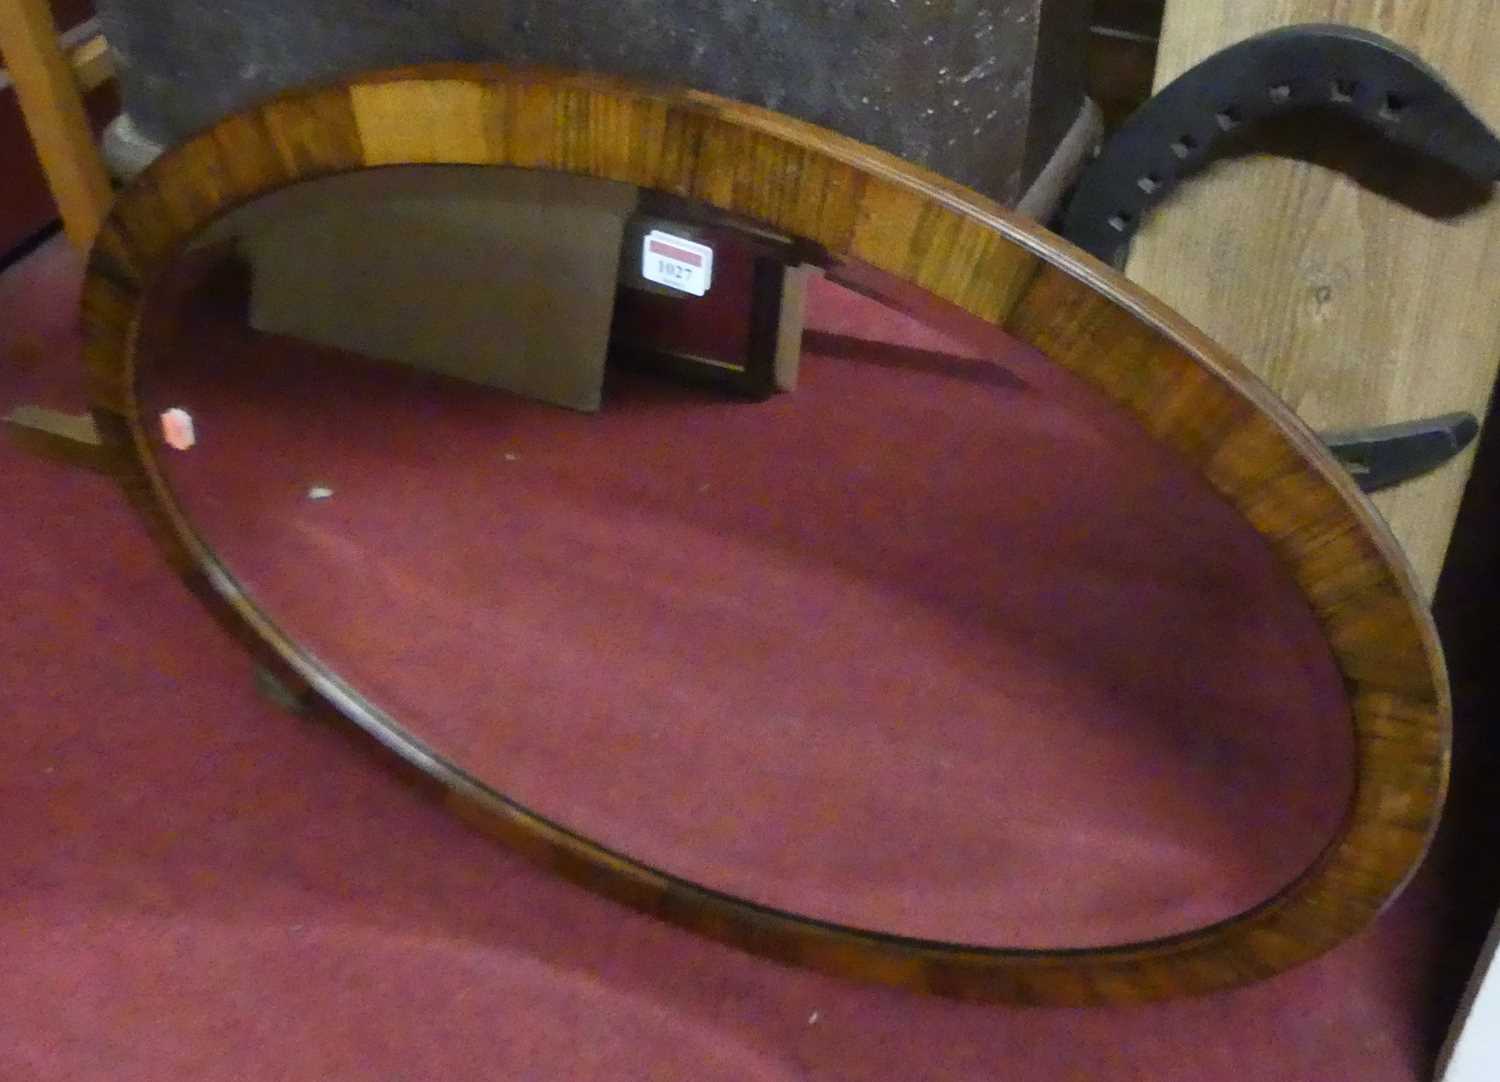 An early 20th century rosewood framed and bevelled oval wall mirror, 80x56cm